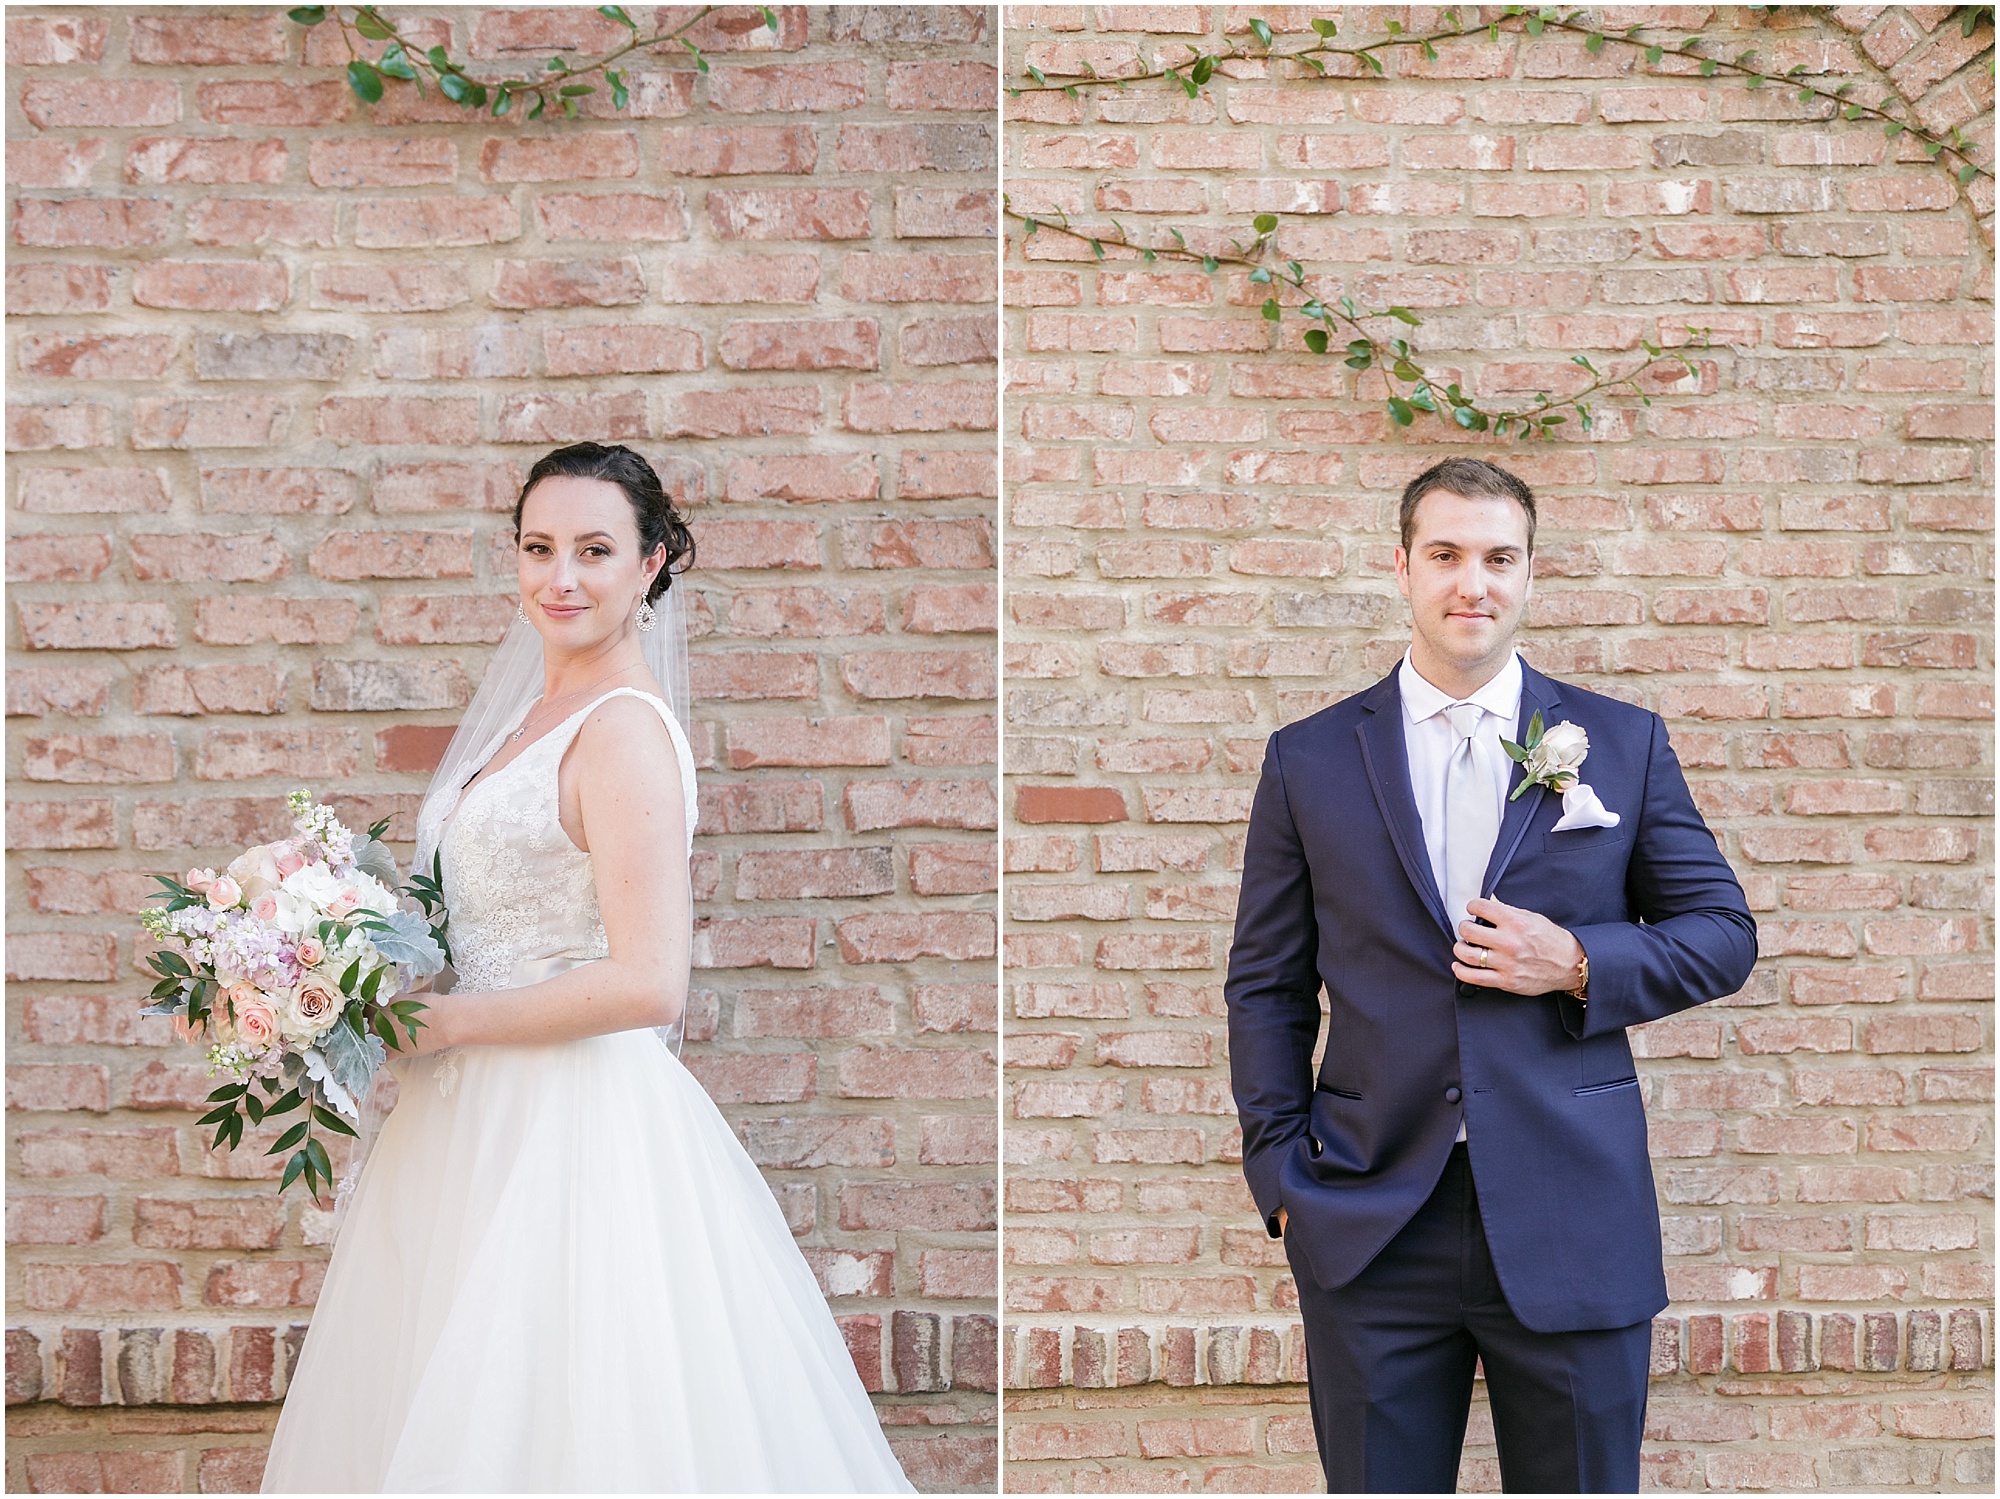 Bride and groom standing in front of brick and vine wall at intimate Italian wedding